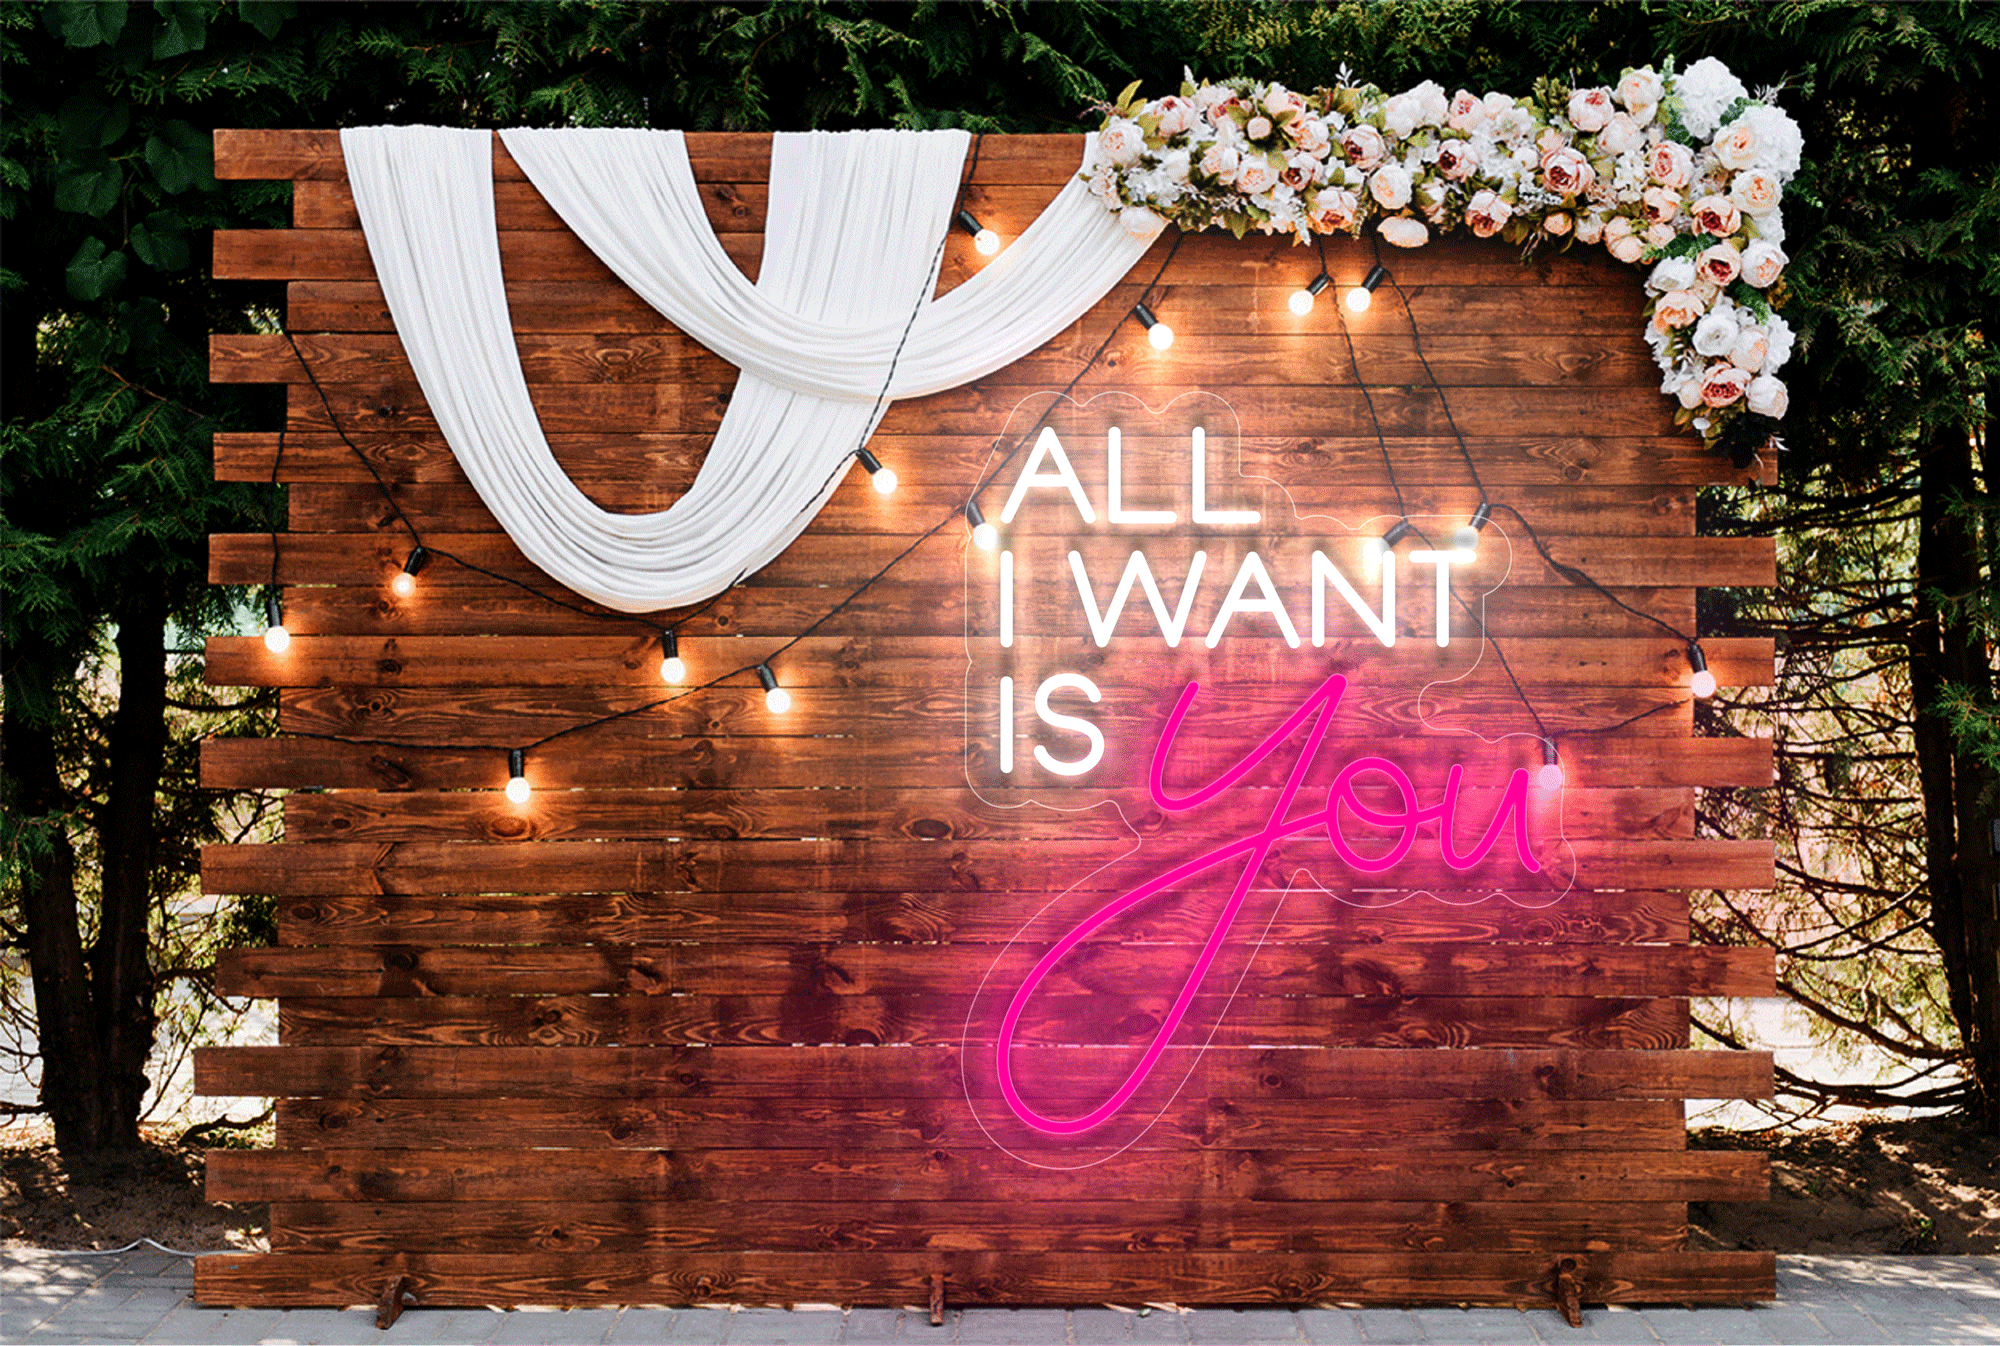 "All I want is You" LED Neon Sign